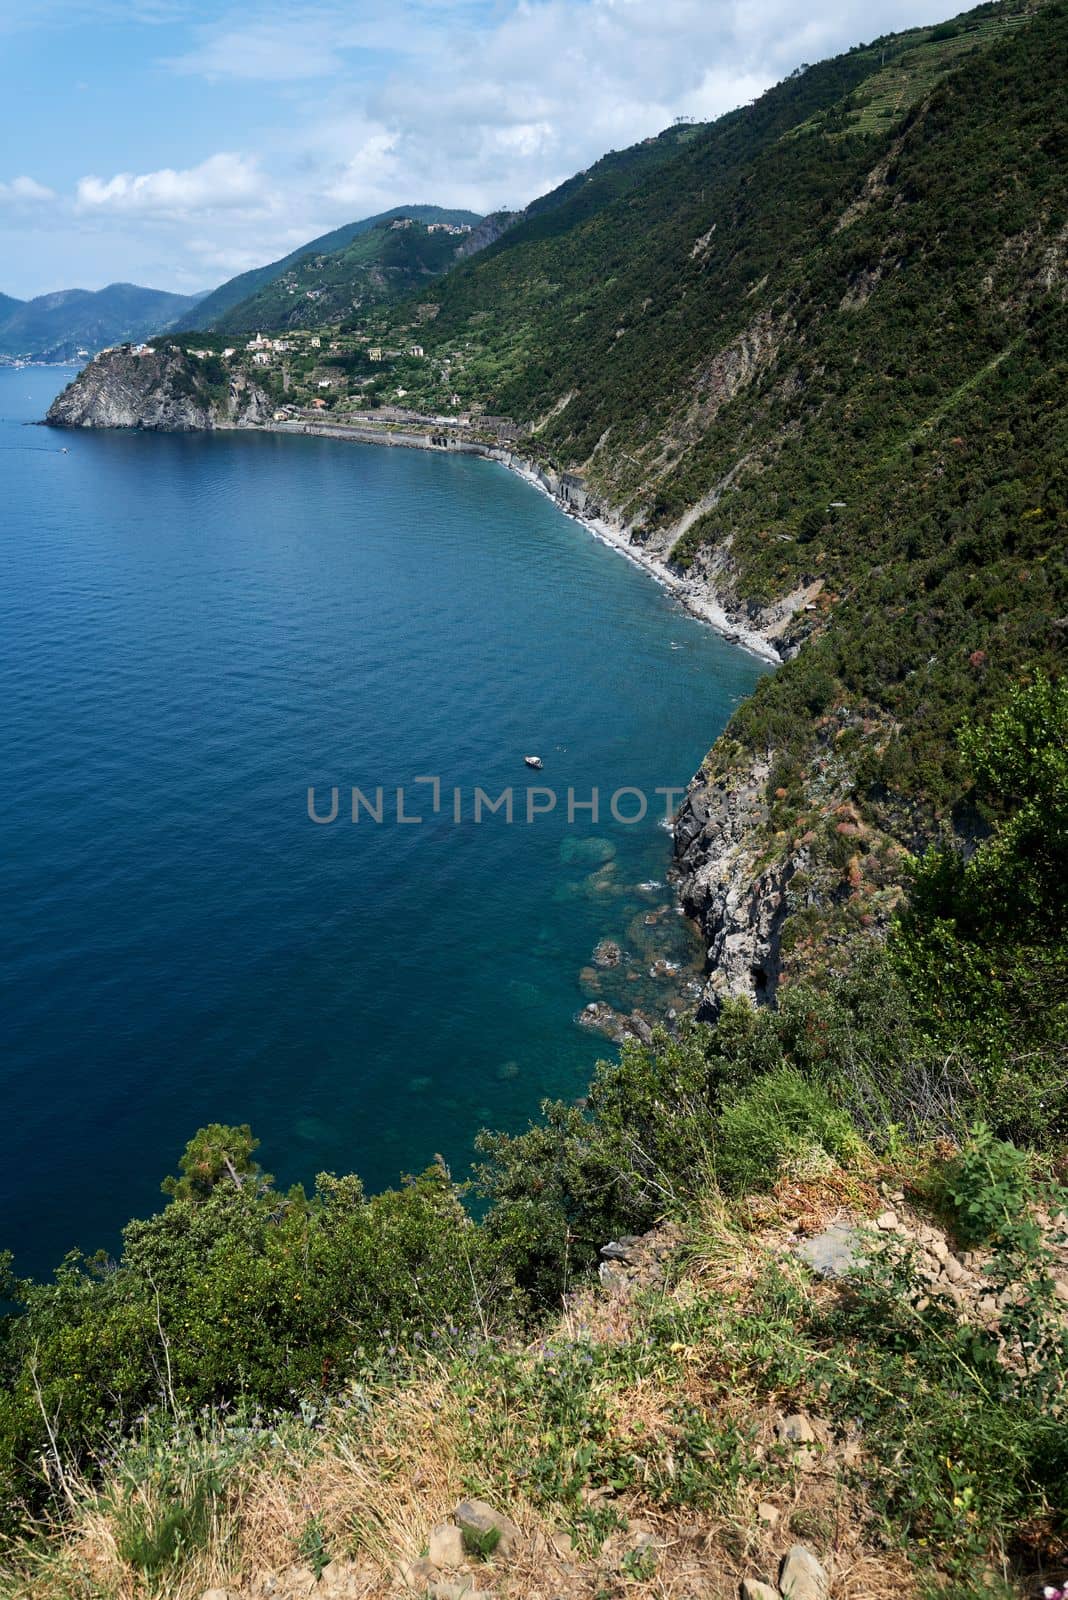 View of a section of the coast with one of the picturesque places in the Italian region of Cinque Terre.